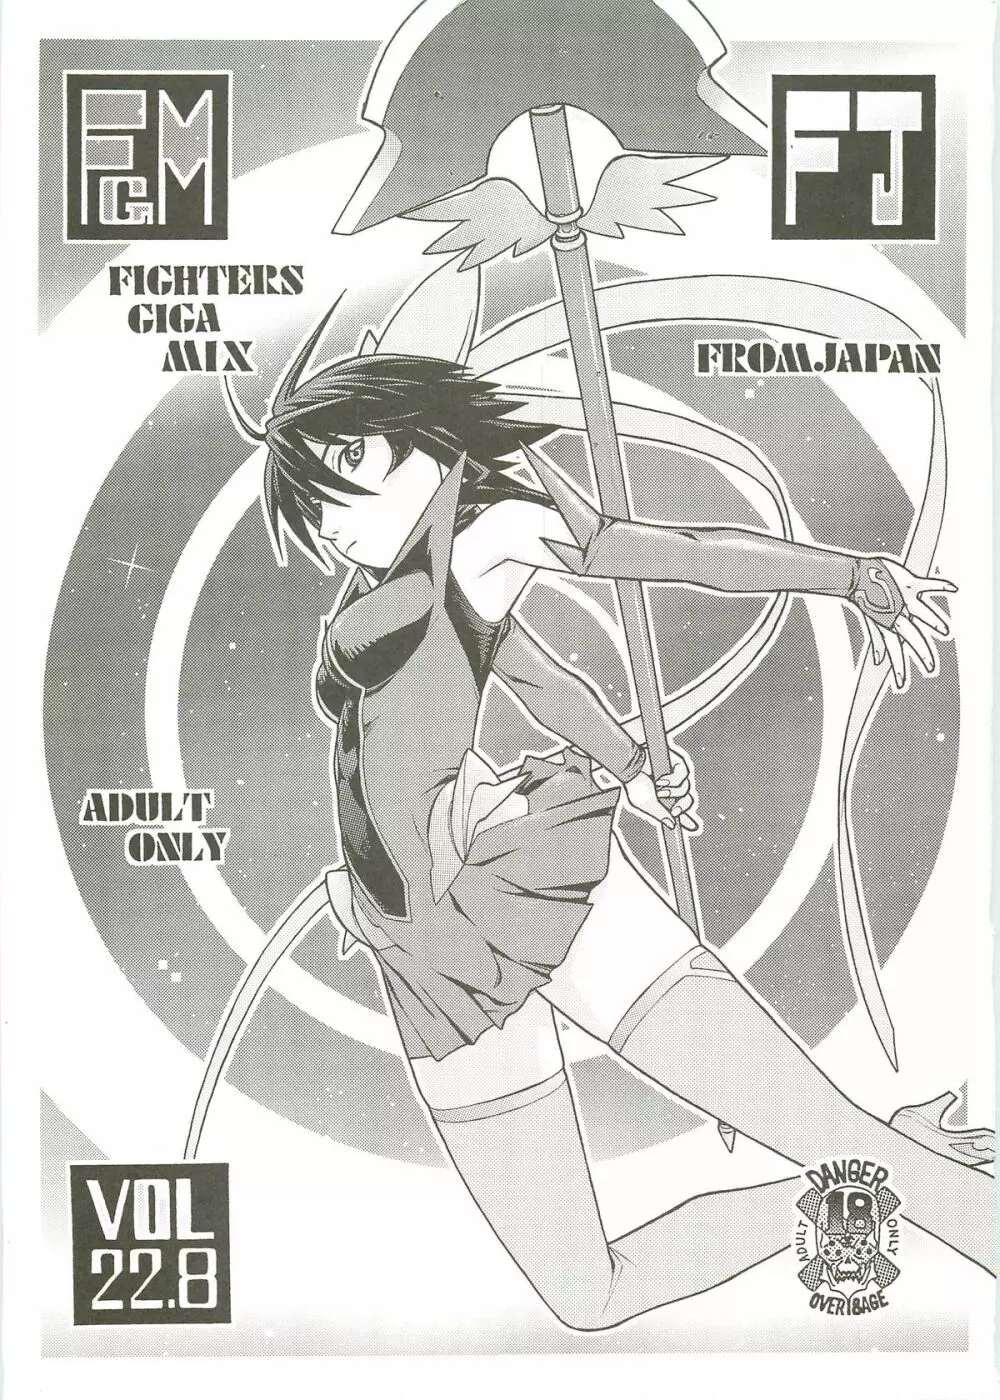 FIGHTERS GIGAMIX Vol.22.8 Page.1